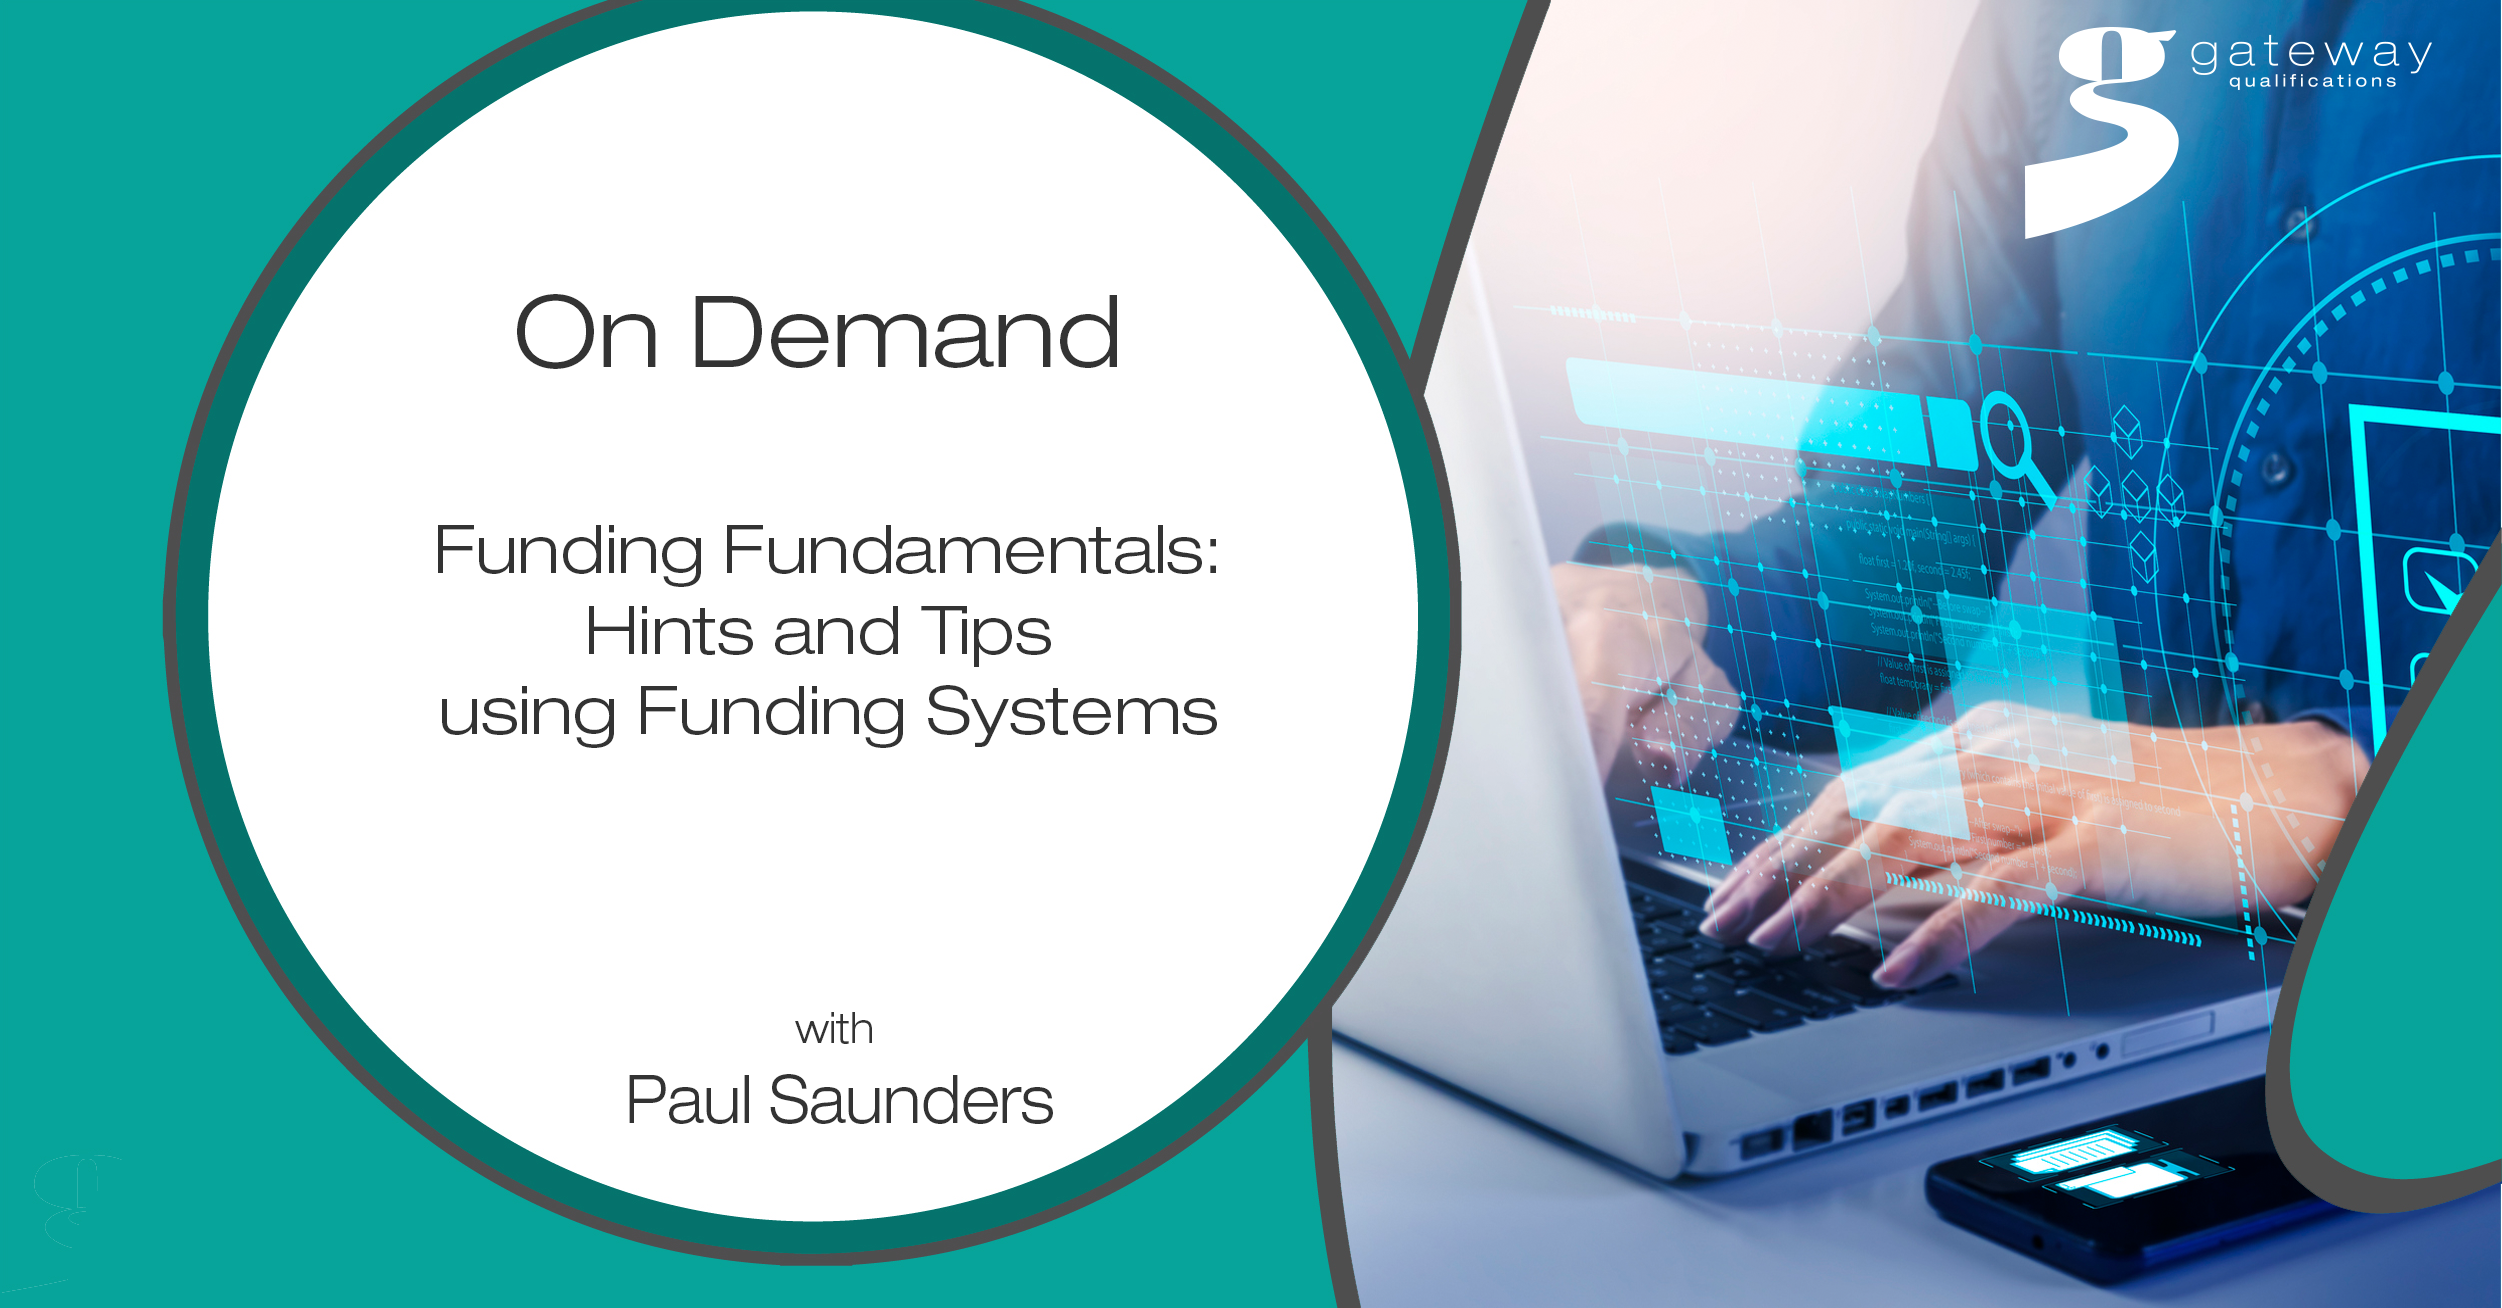 Hints and tips using funding systems - on demand